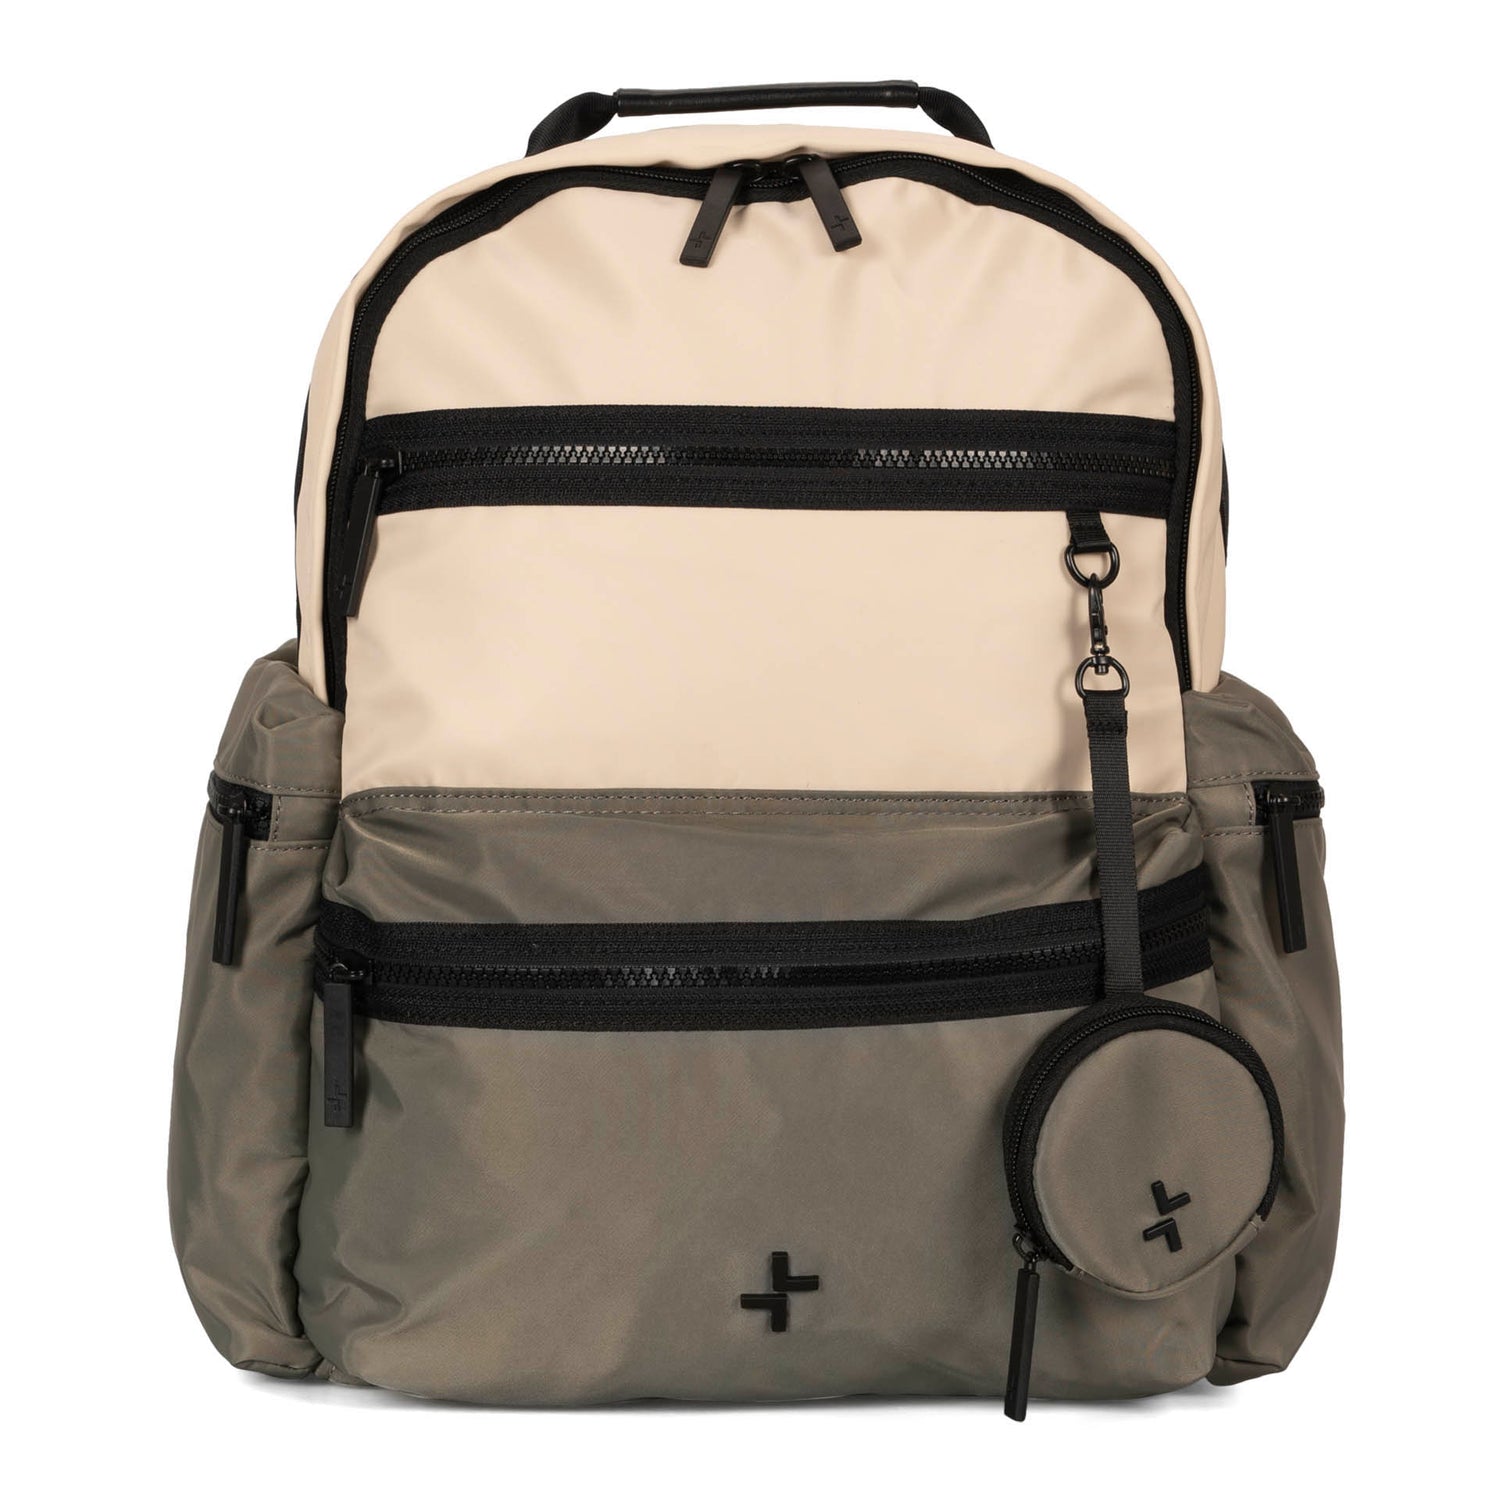 Angle view of a grey-green and beige backpack called Sutton by Tracker, showcasing its 2 front zipper pockets, an ear pod pouch, top handle and 2 side zipper pockets.